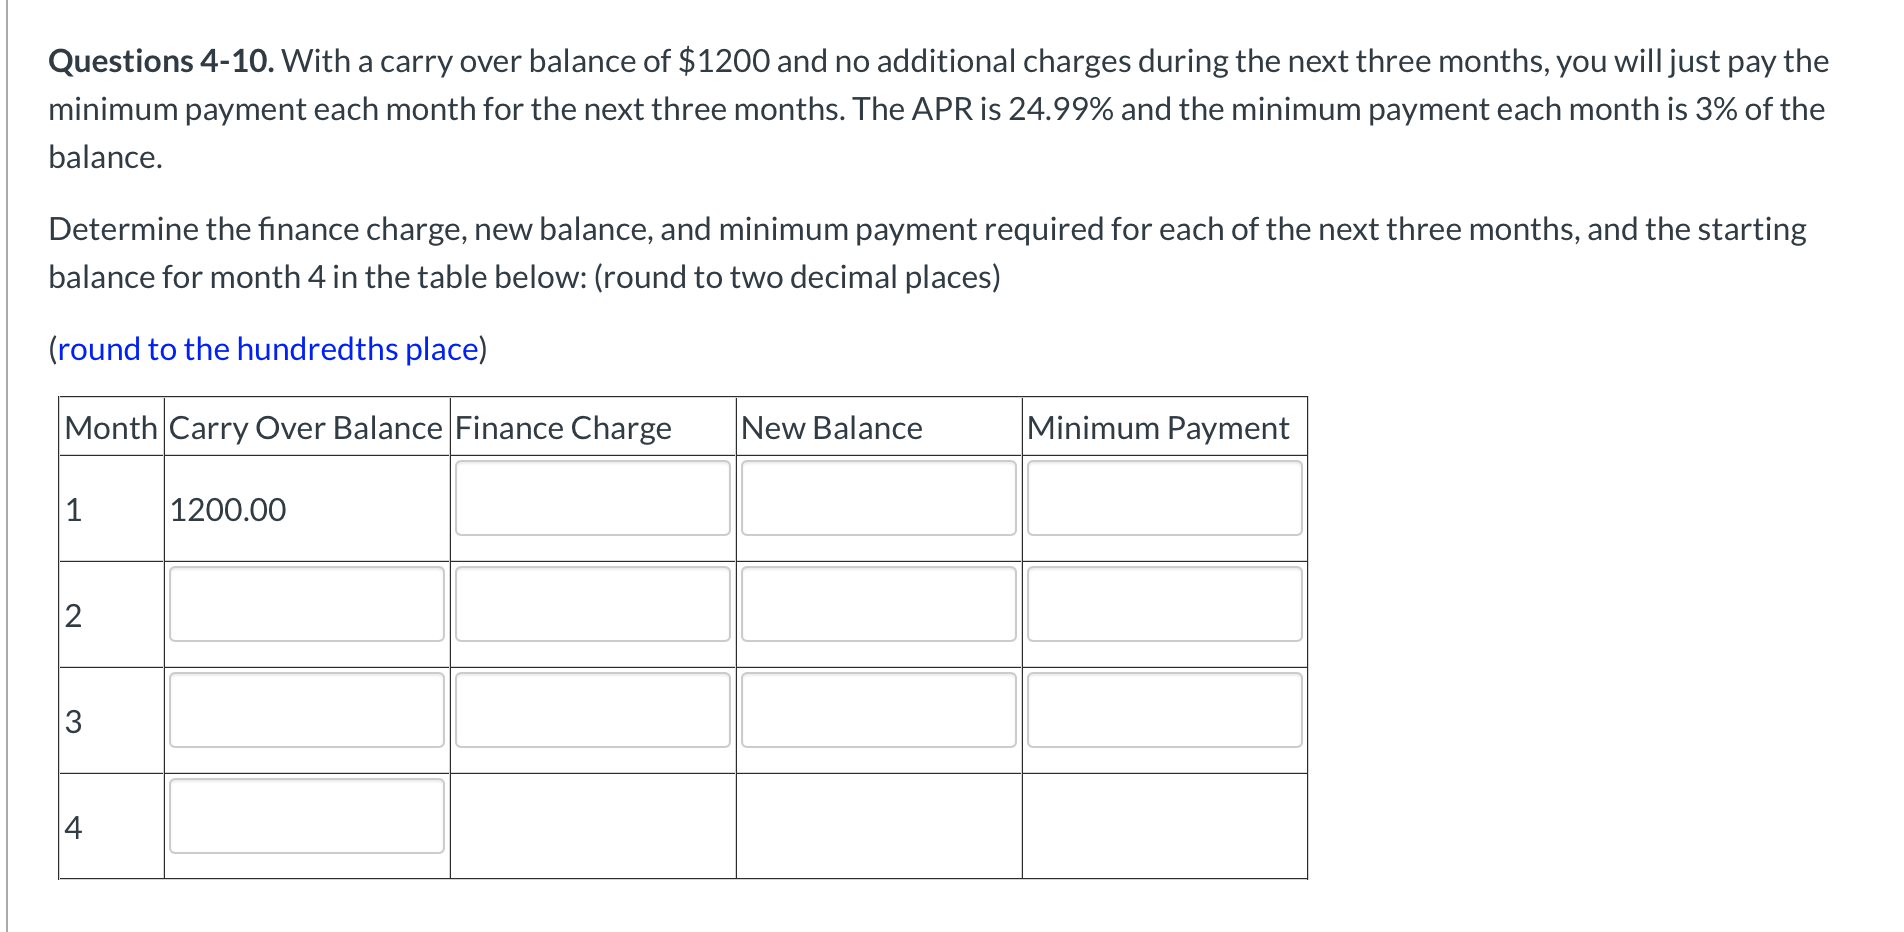 Questions 4-10. With a carry over balance of $1200 and no additional charges during the next three months, you will just pay the
minimum payment each month for the next three months. The APR is 24.99% and the minimum payment each month is 3% of the
balance.
Determine the finance charge, new balance, and minimum payment required for each of the next three months, and the starting
balance for month 4 in the table below: (round to two decimal places)
(round to the hundredths place)
Month Carry Over Balance Finance Charge
New Balance
Minimum Payment
1
|1200.00
2
3
4
